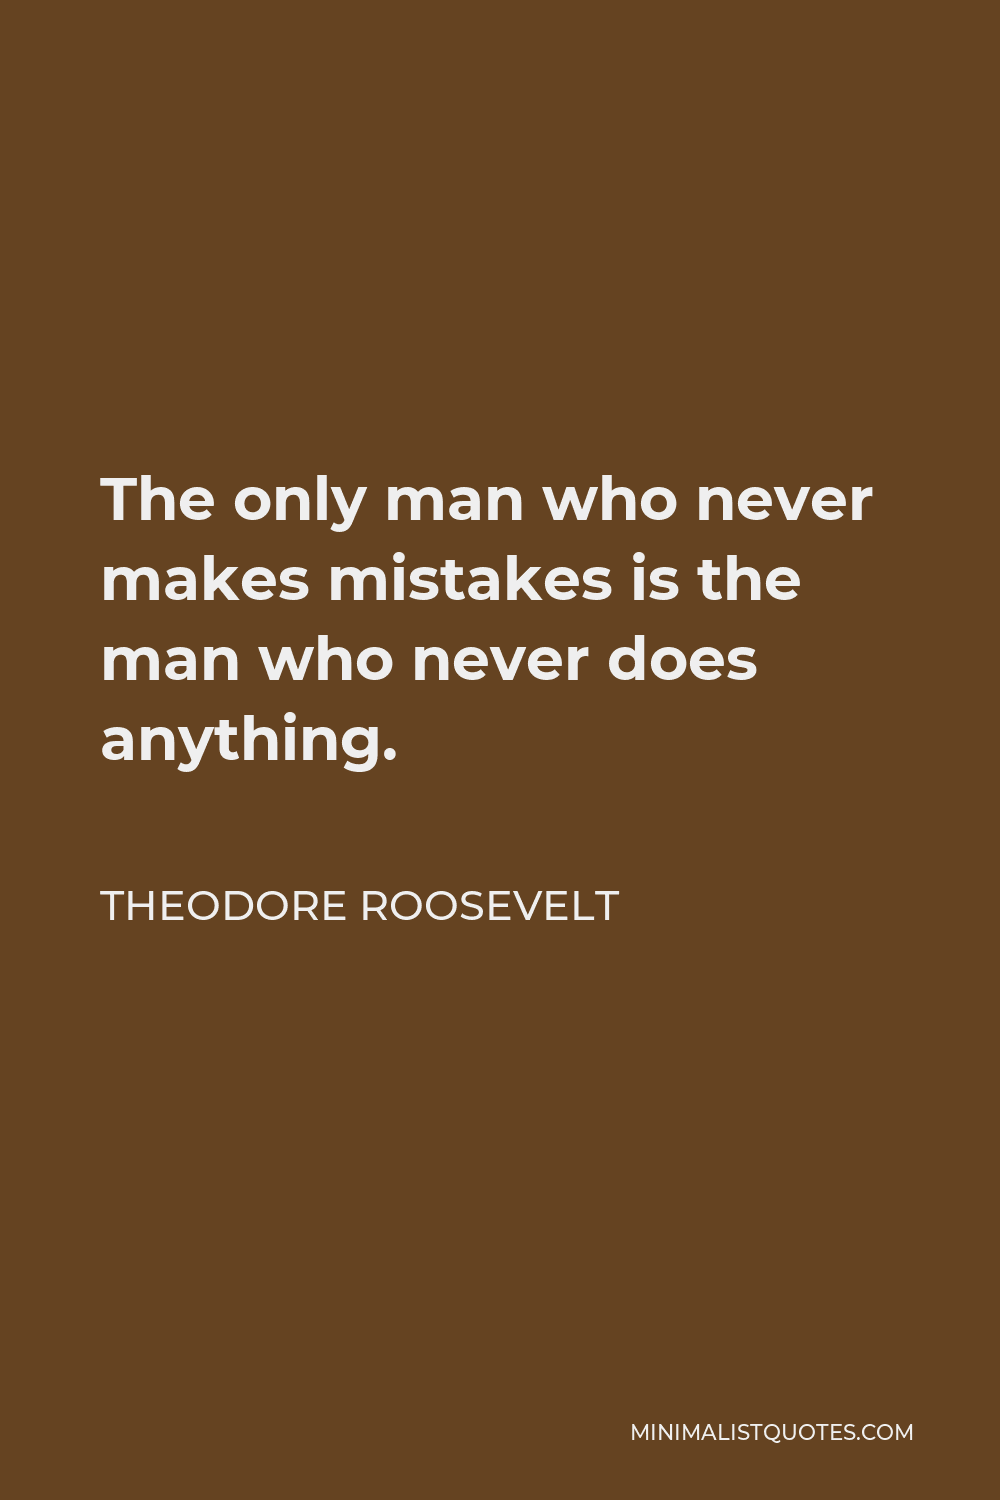 Theodore Roosevelt Quote - The only man who never makes mistakes is the man who never does anything.